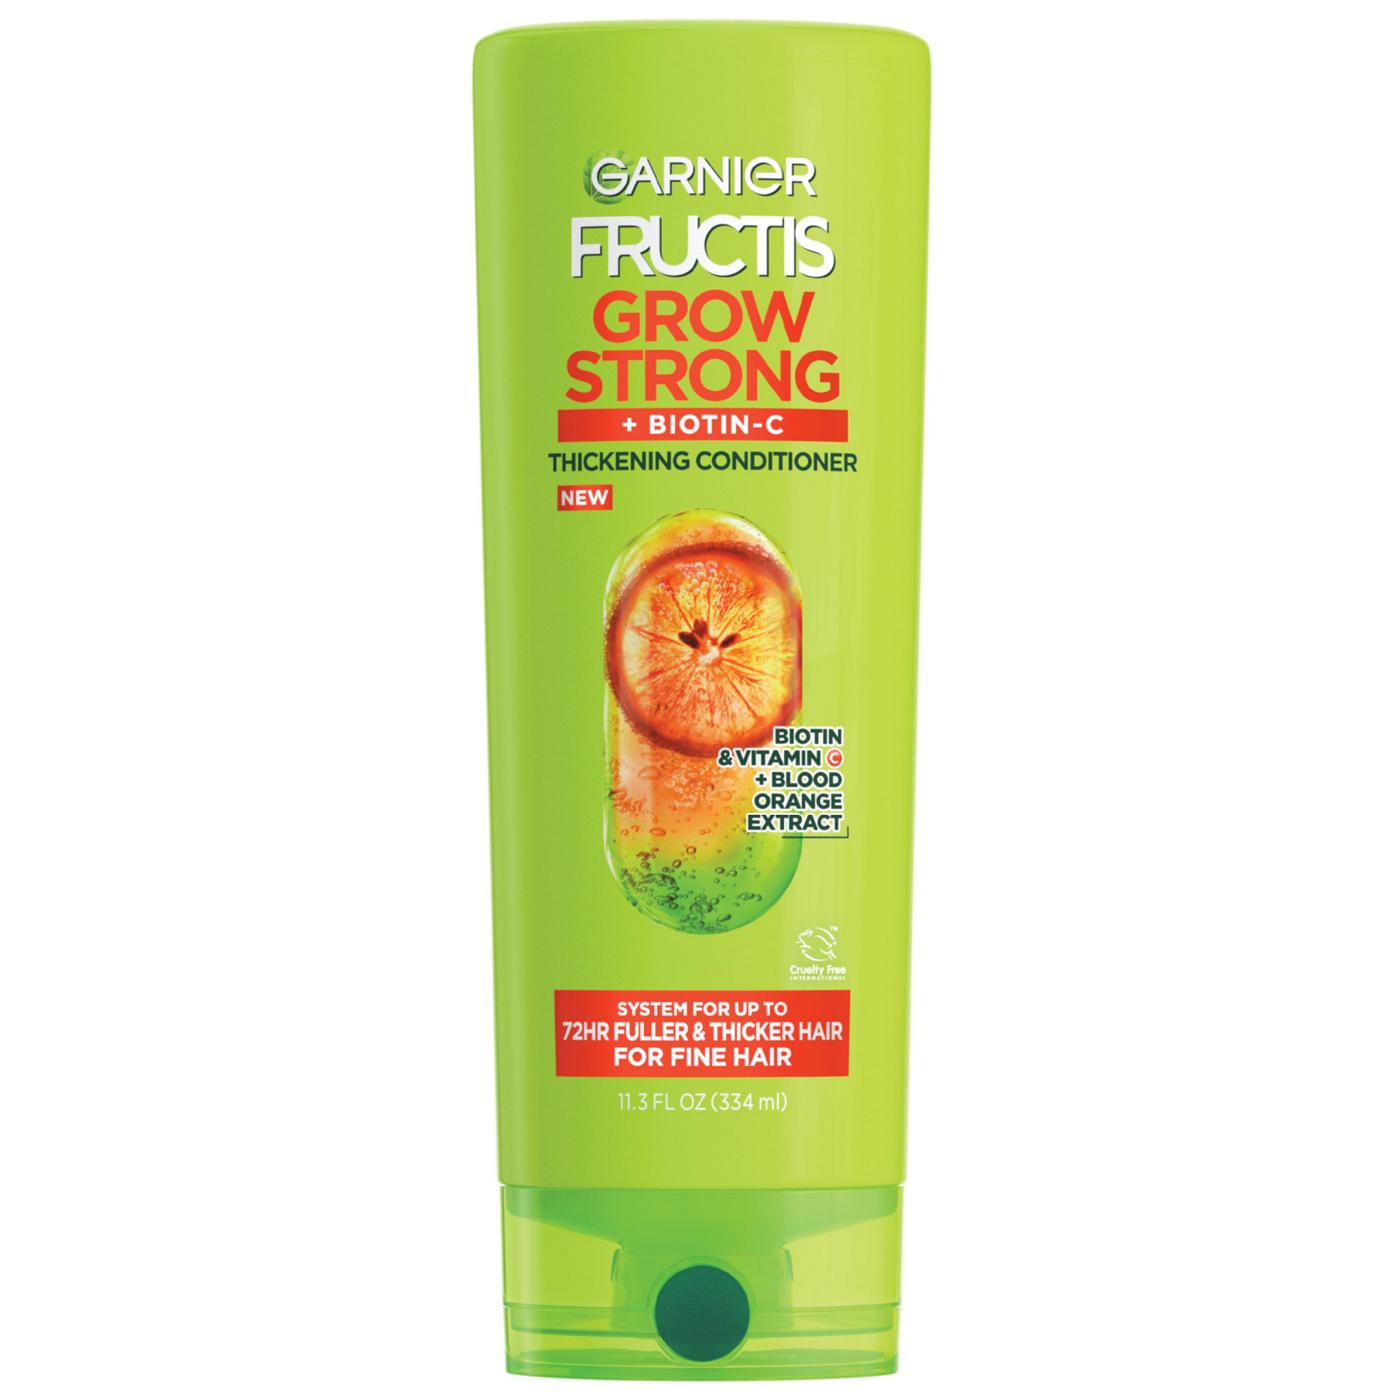 Garnier Fructis Grow Strong Thickening Conditioner; image 1 of 4